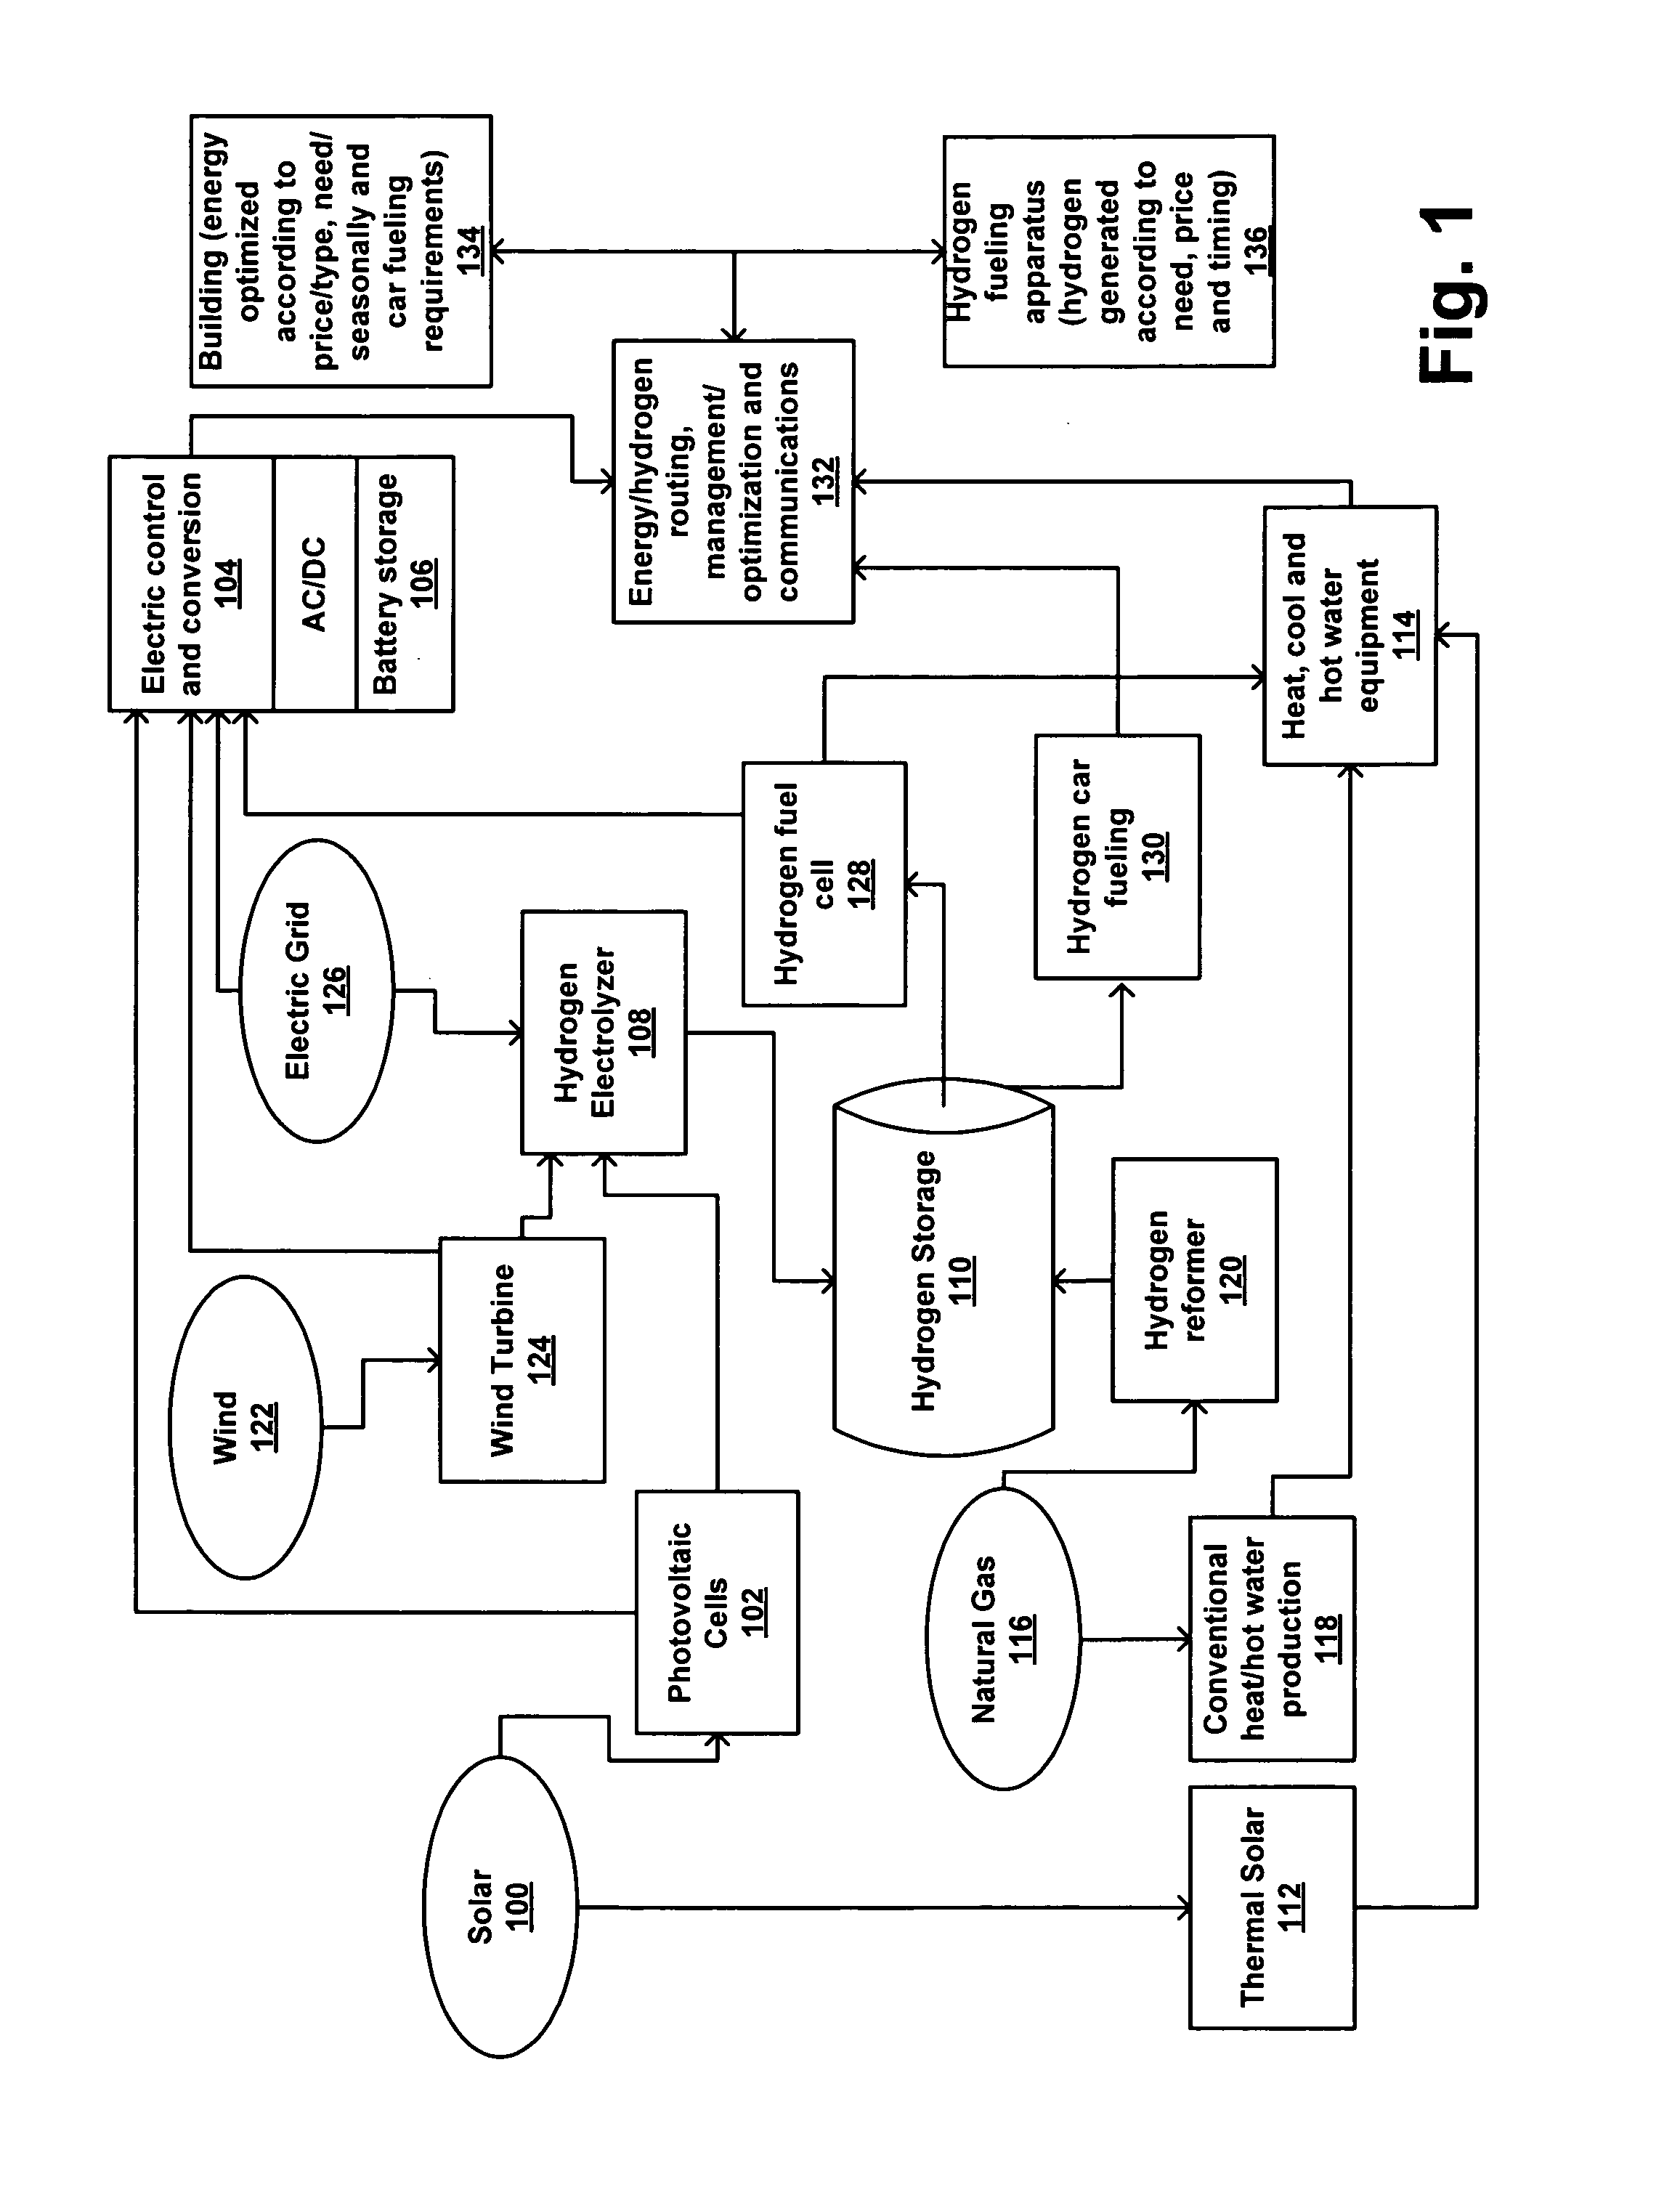 Method and apparatus for simultaneous optimization of distributed generation and hydrogen production